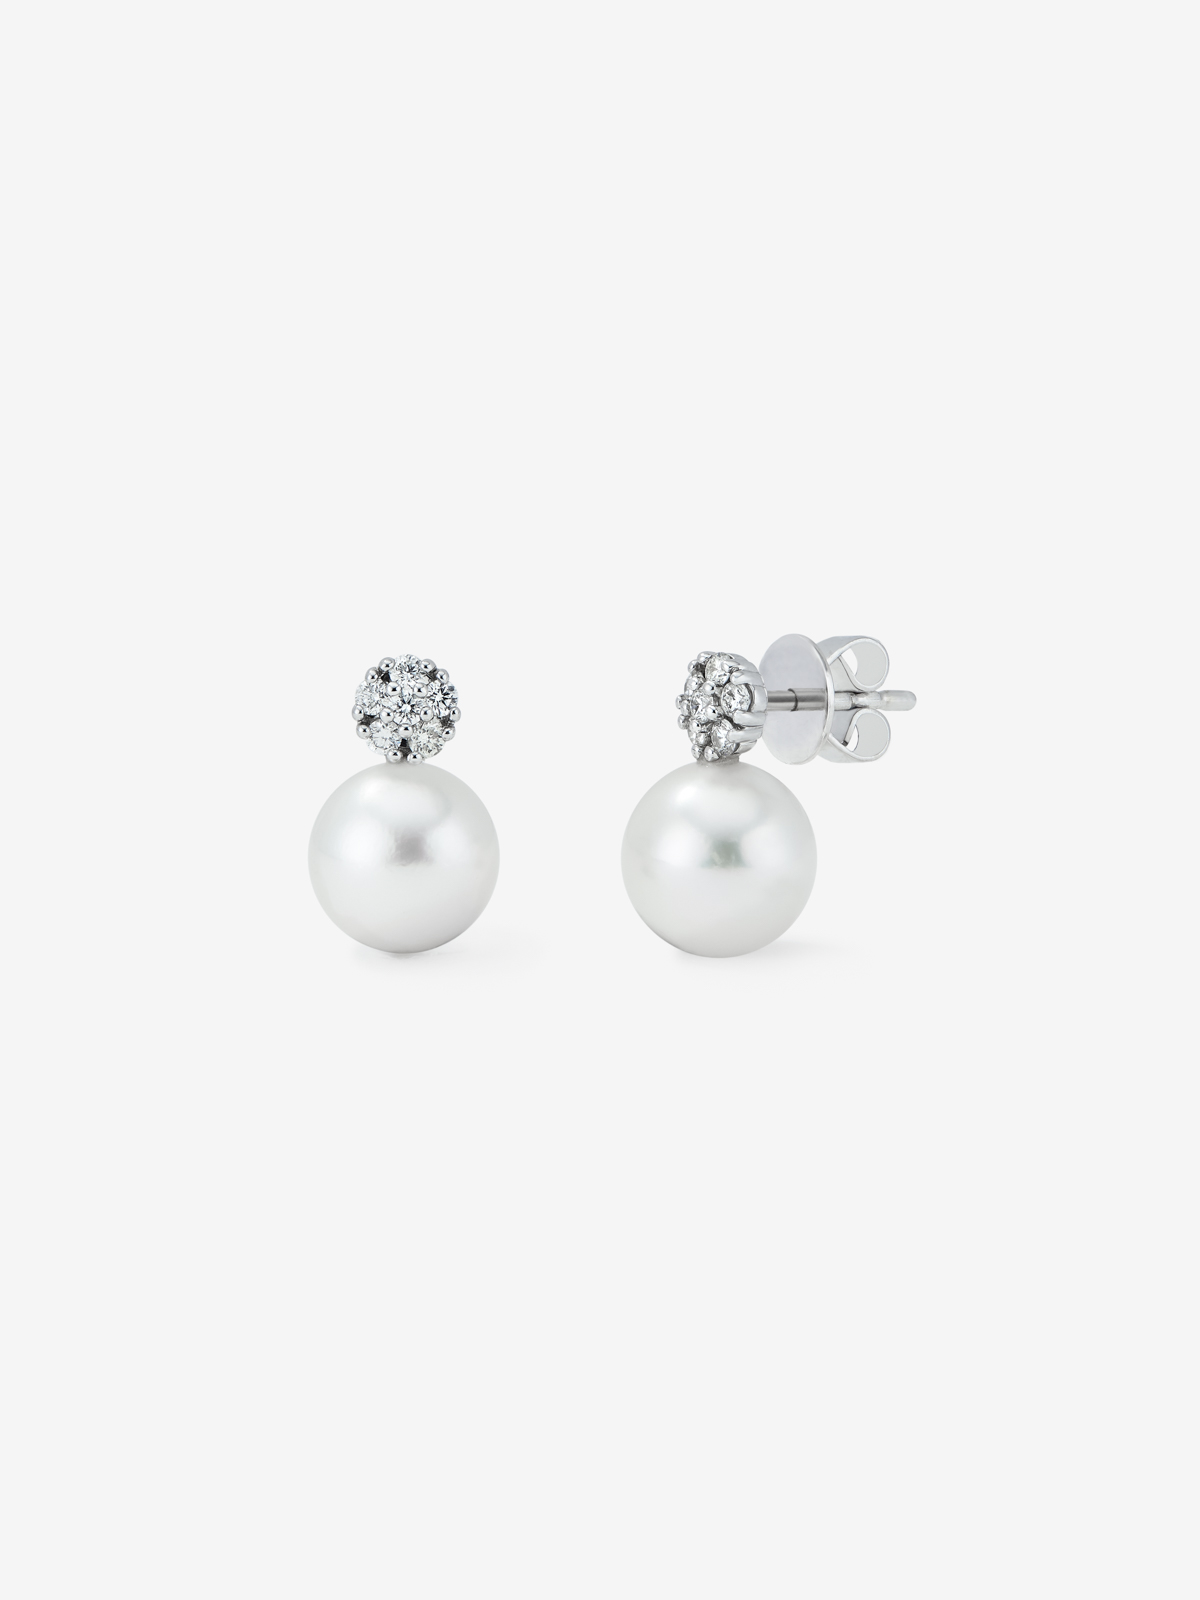 18k White Gold Earring with 8mm Australian Pearl and Diamond.